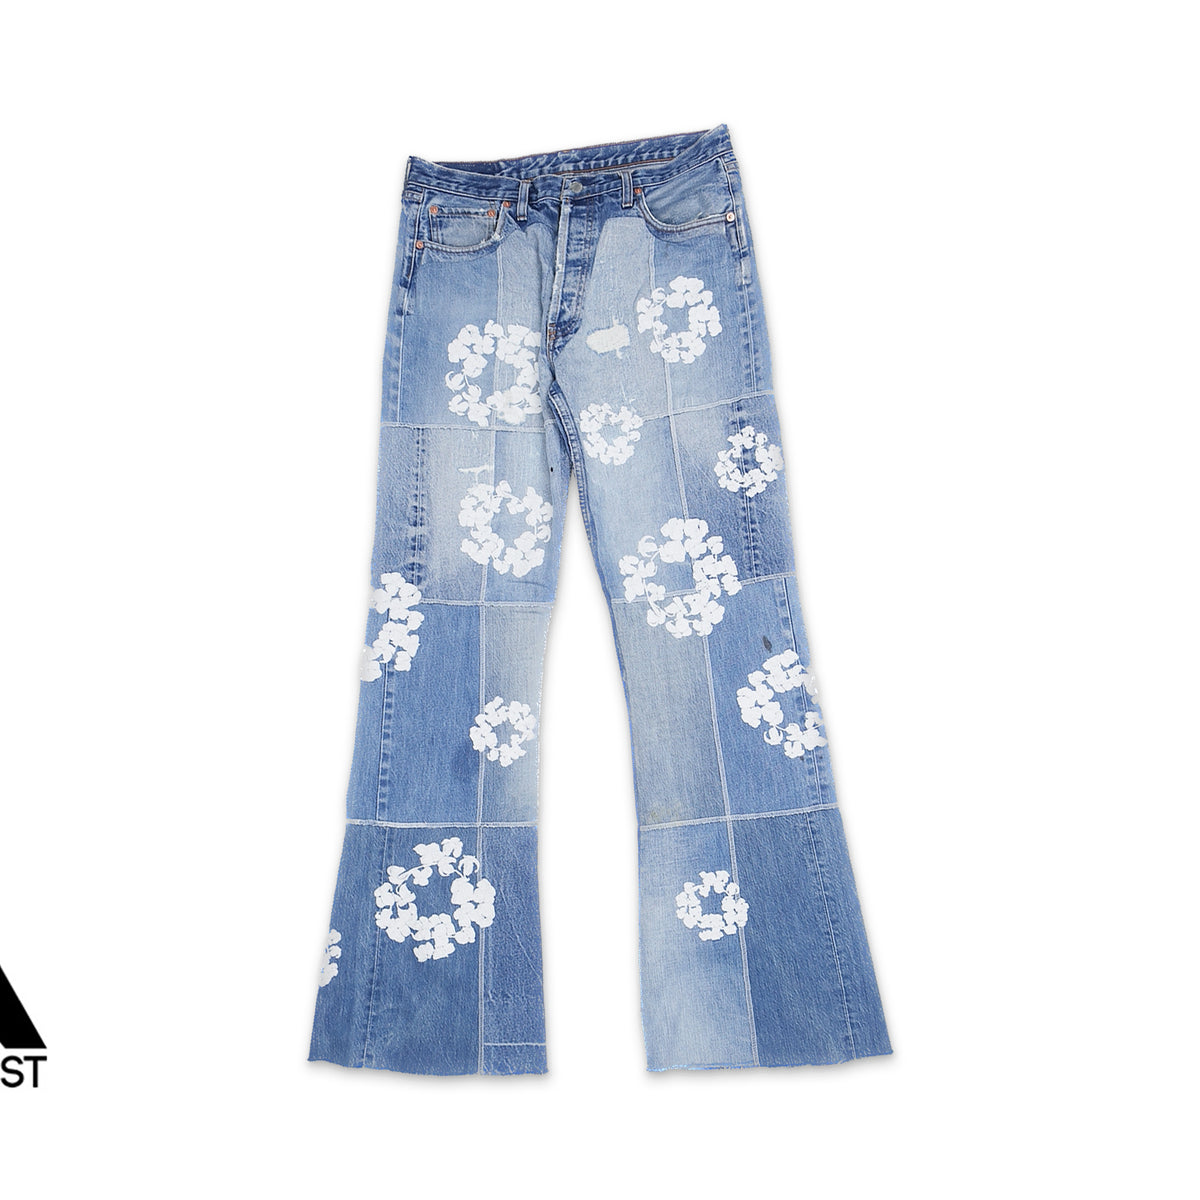 Denim Tears x Readymade Cotton Wreath Embroidered Jeans